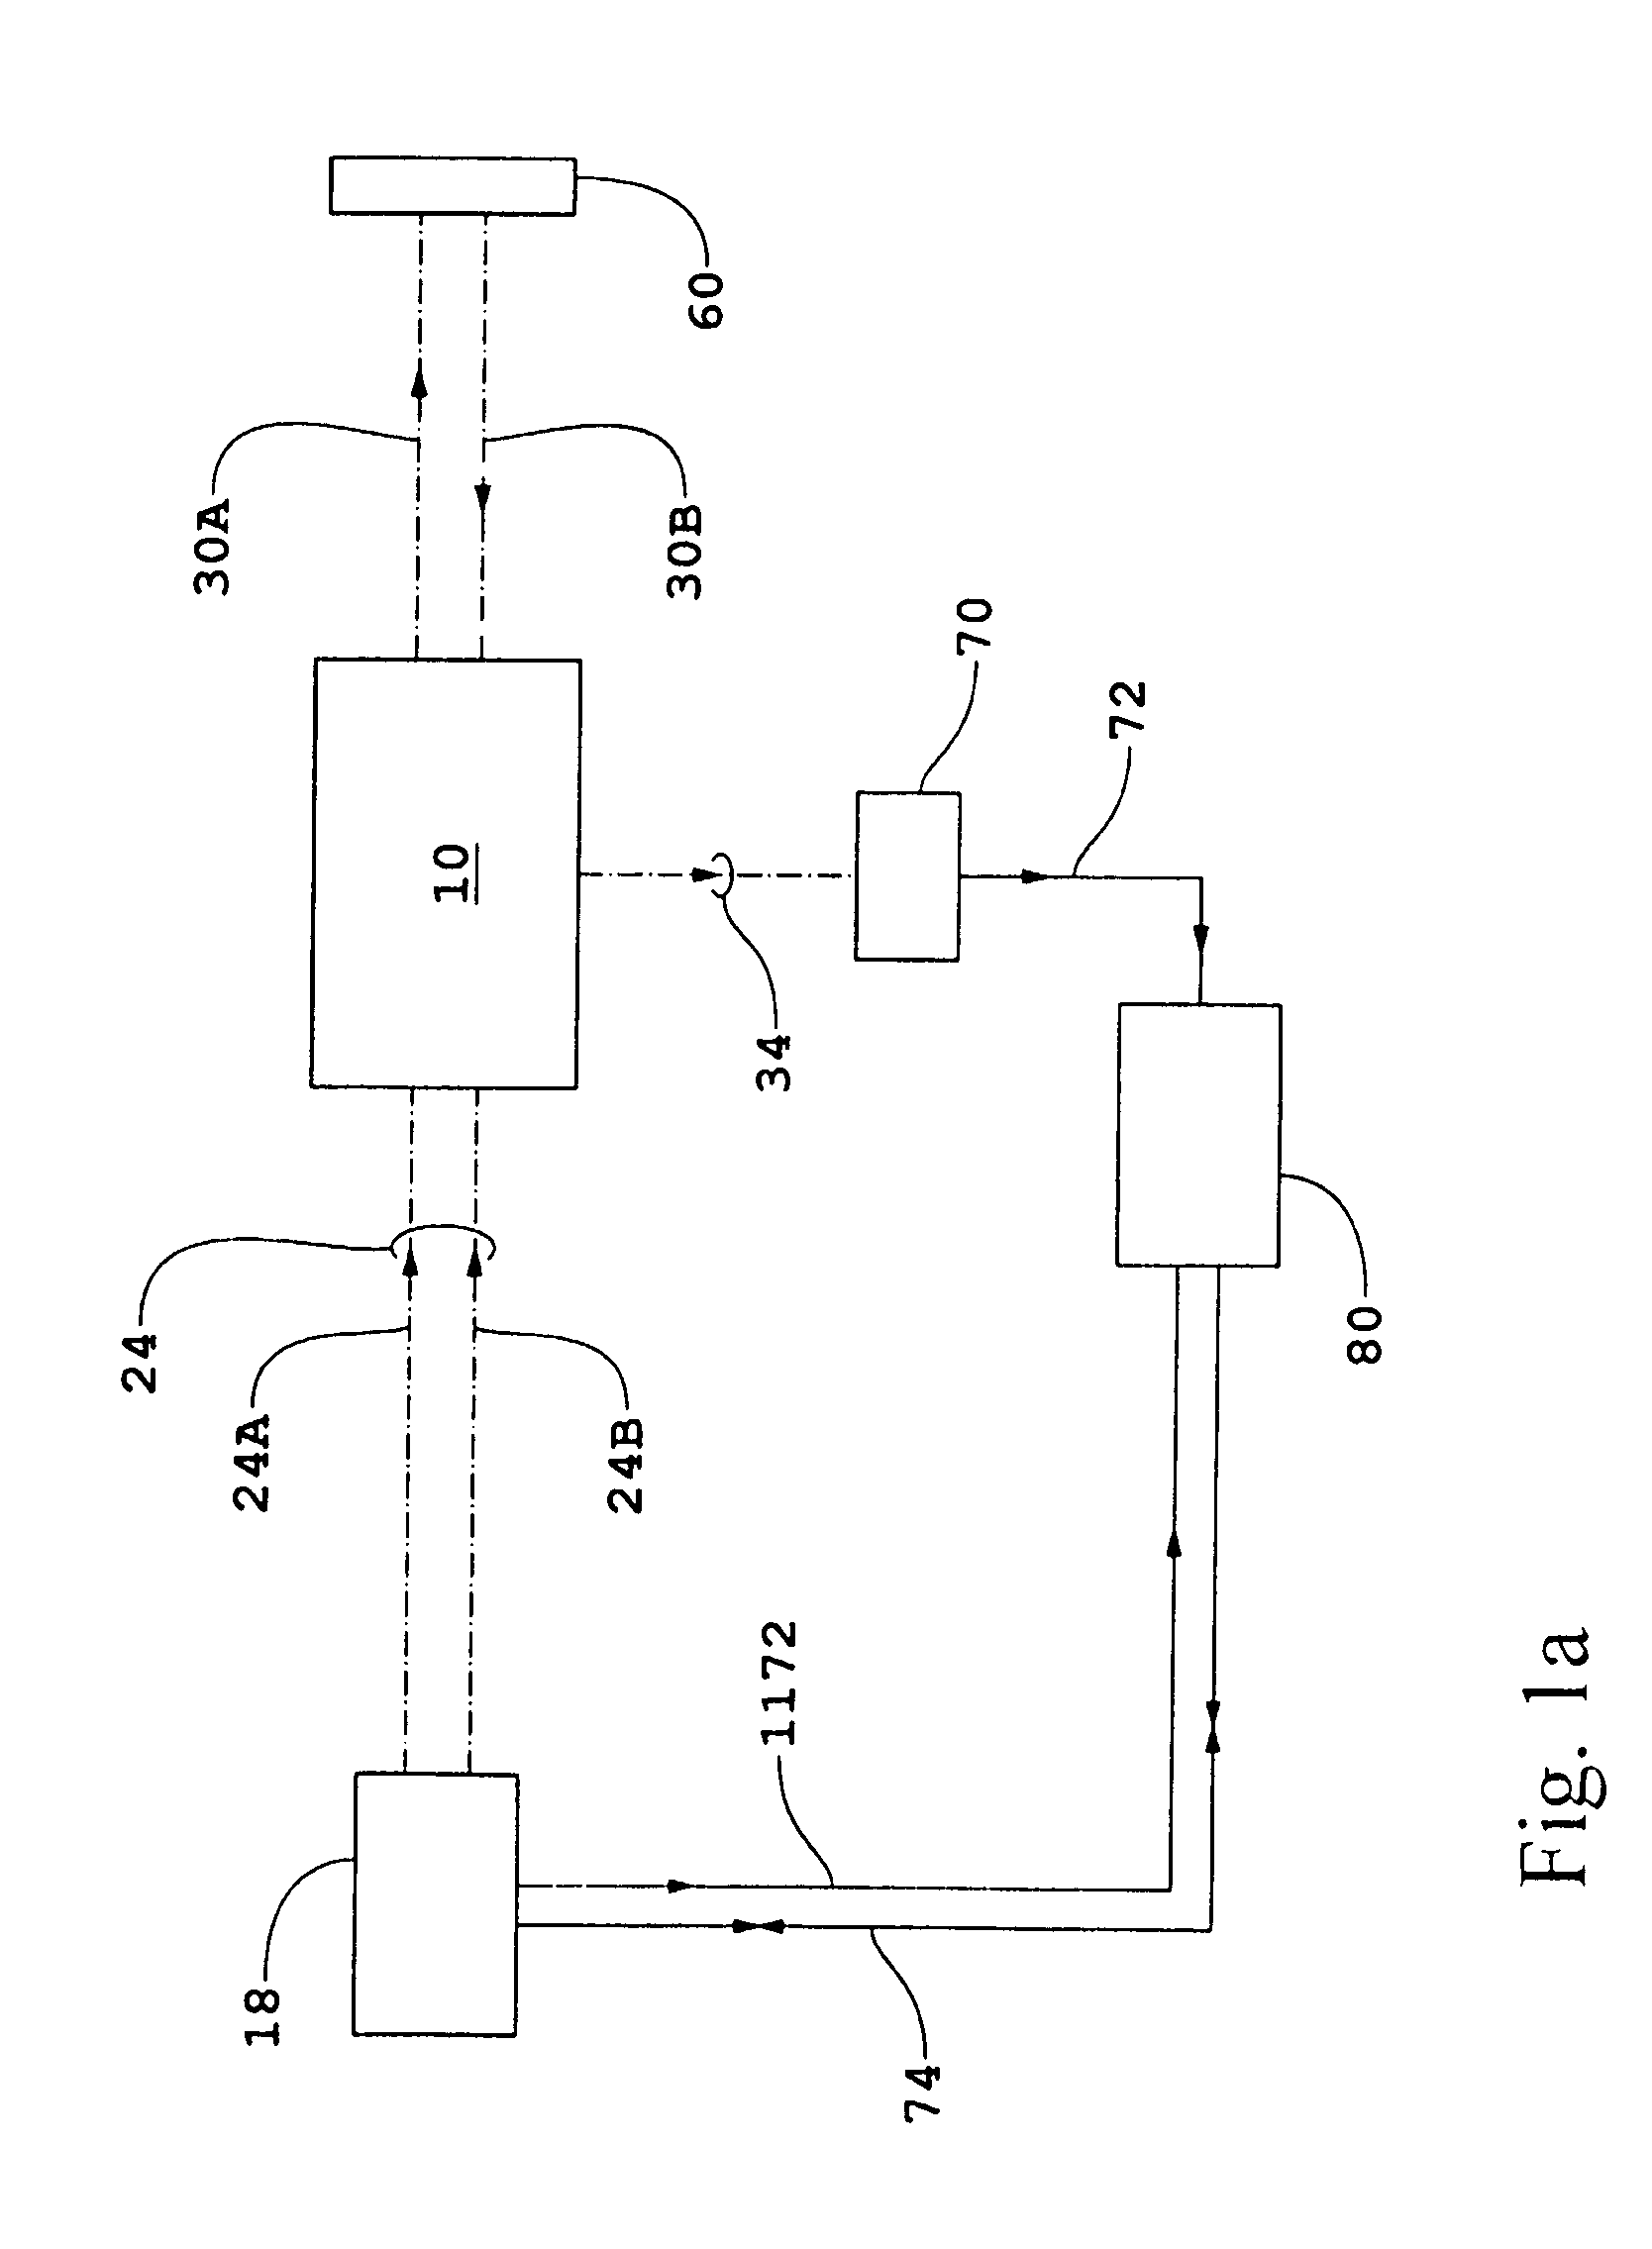 Apparatus and method for reducing effects of coherent artifacts and compensation of effects of vibrations and environmental changes in interferometry